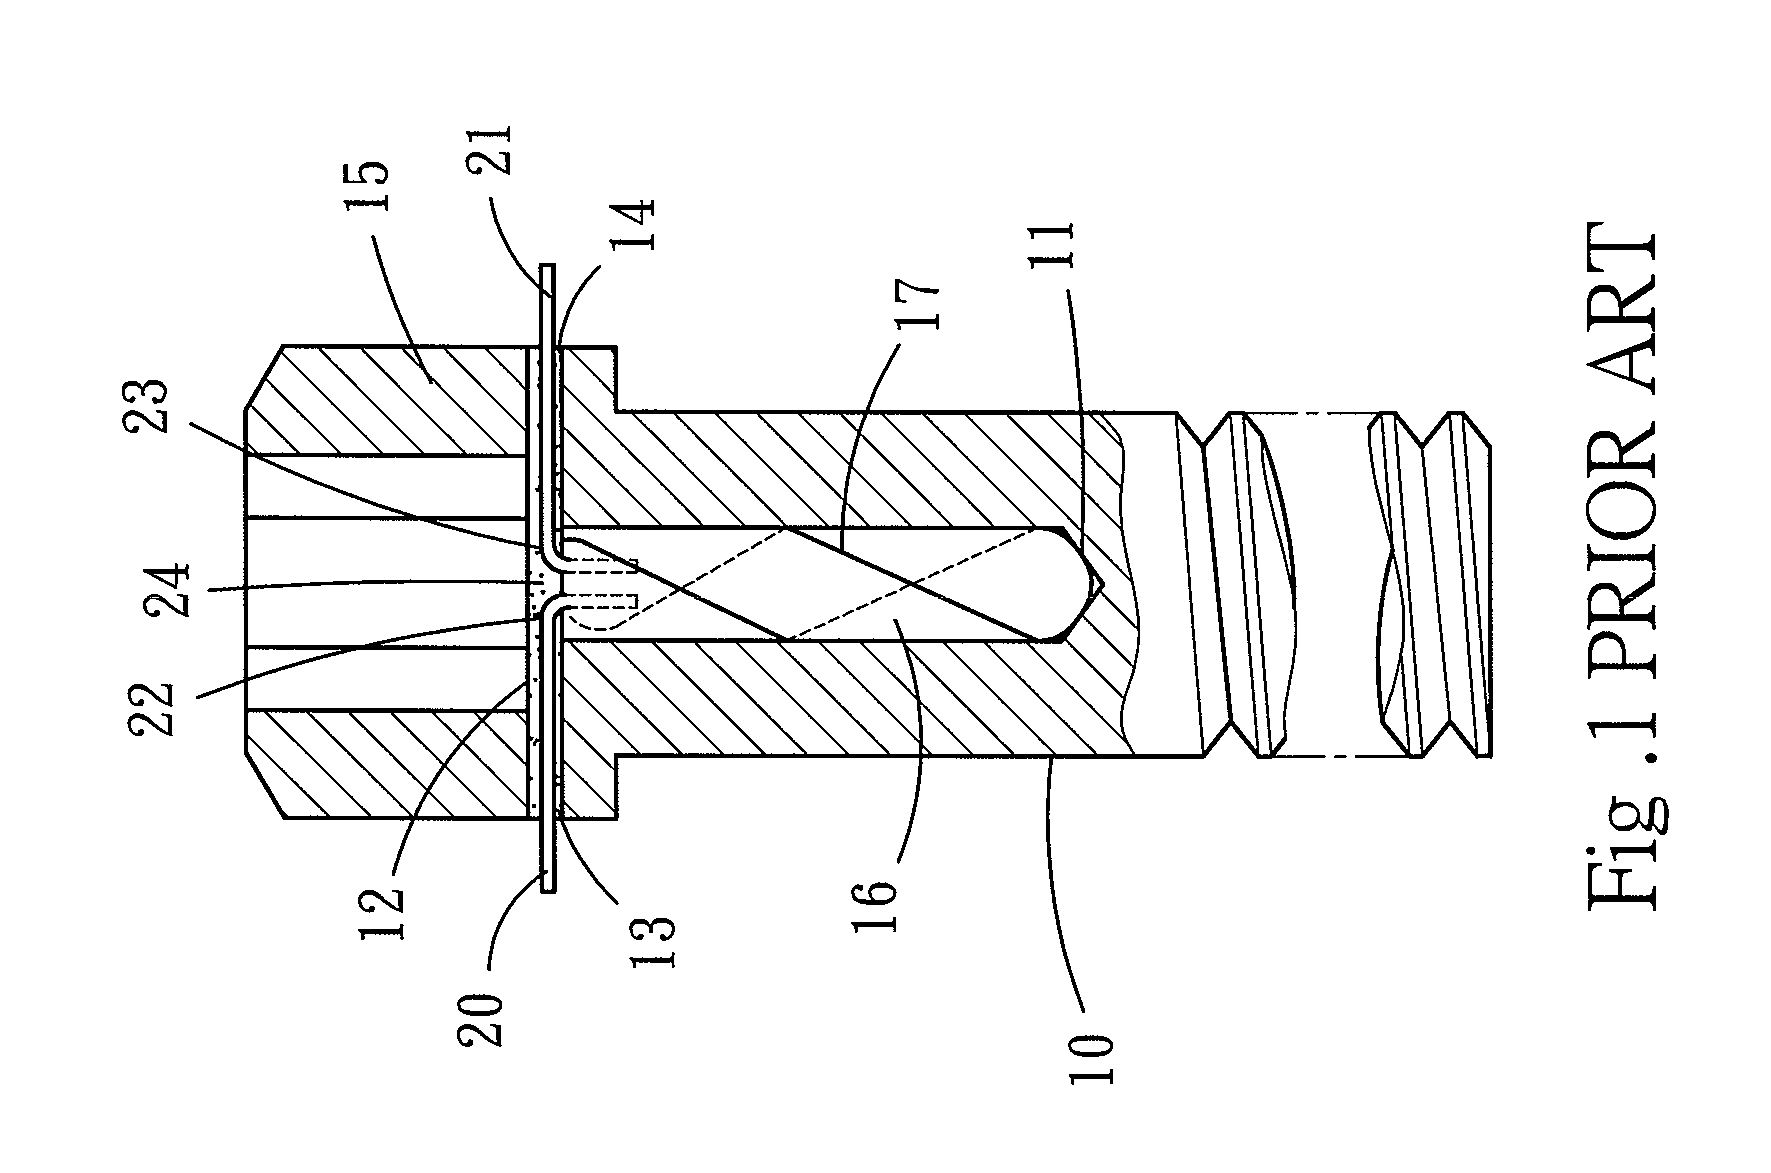 Synchronous pre-tensionable sensing screw with fiber bragg grating devices